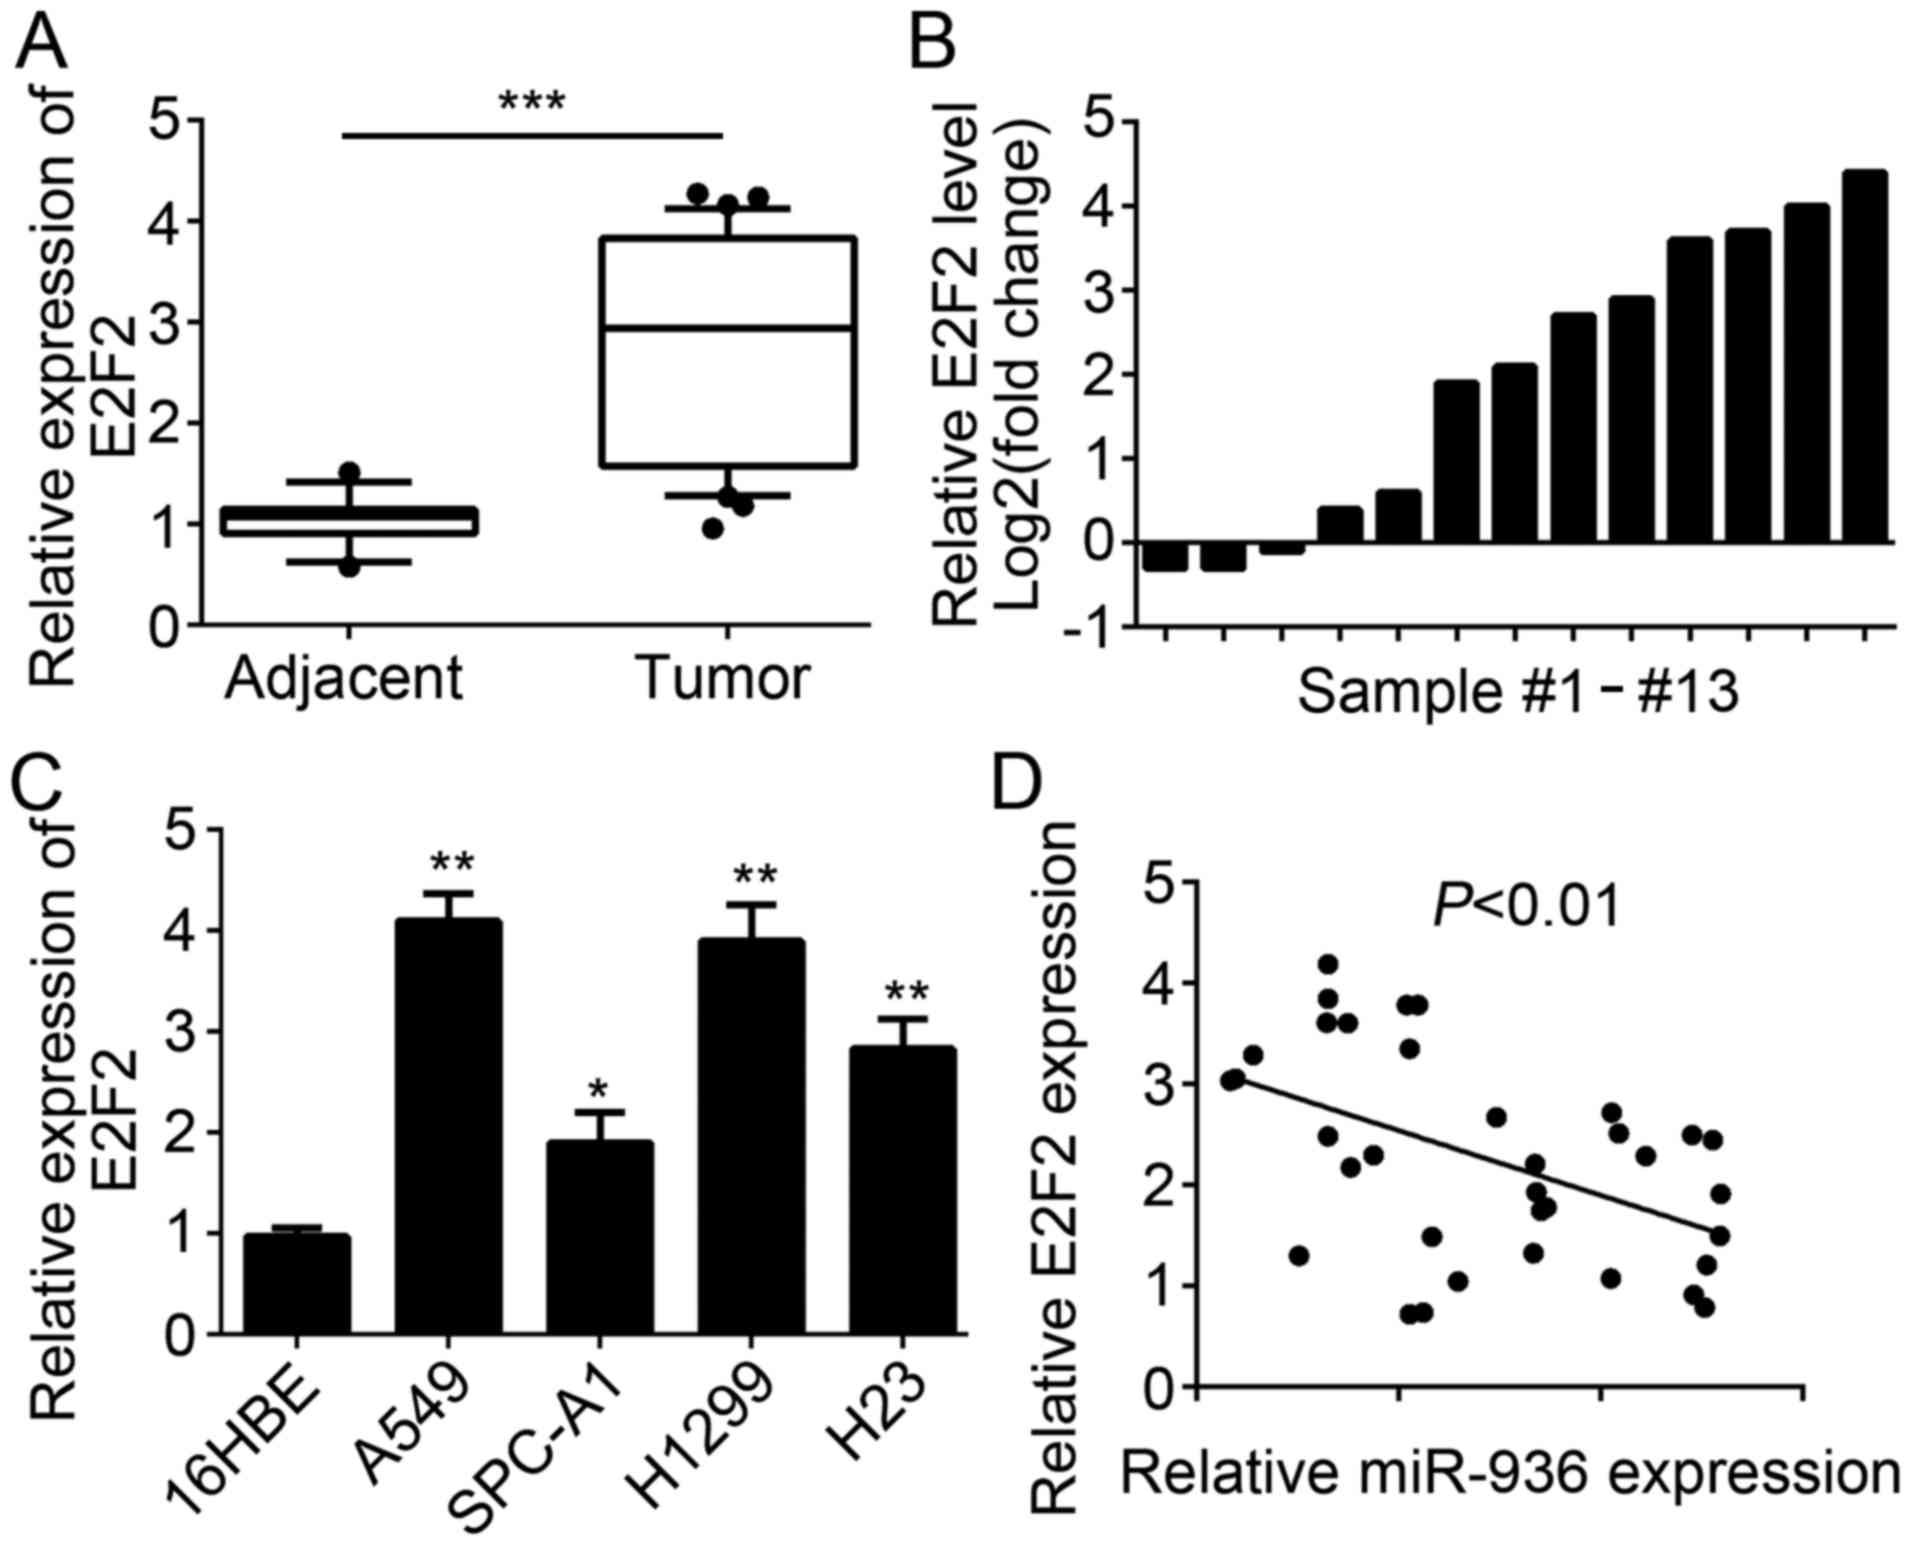 Overexpression Of Microrna 936 Suppresses Non Small Cell Lung Cancer Cell Proliferation And Invasion Via Targeting E2f2